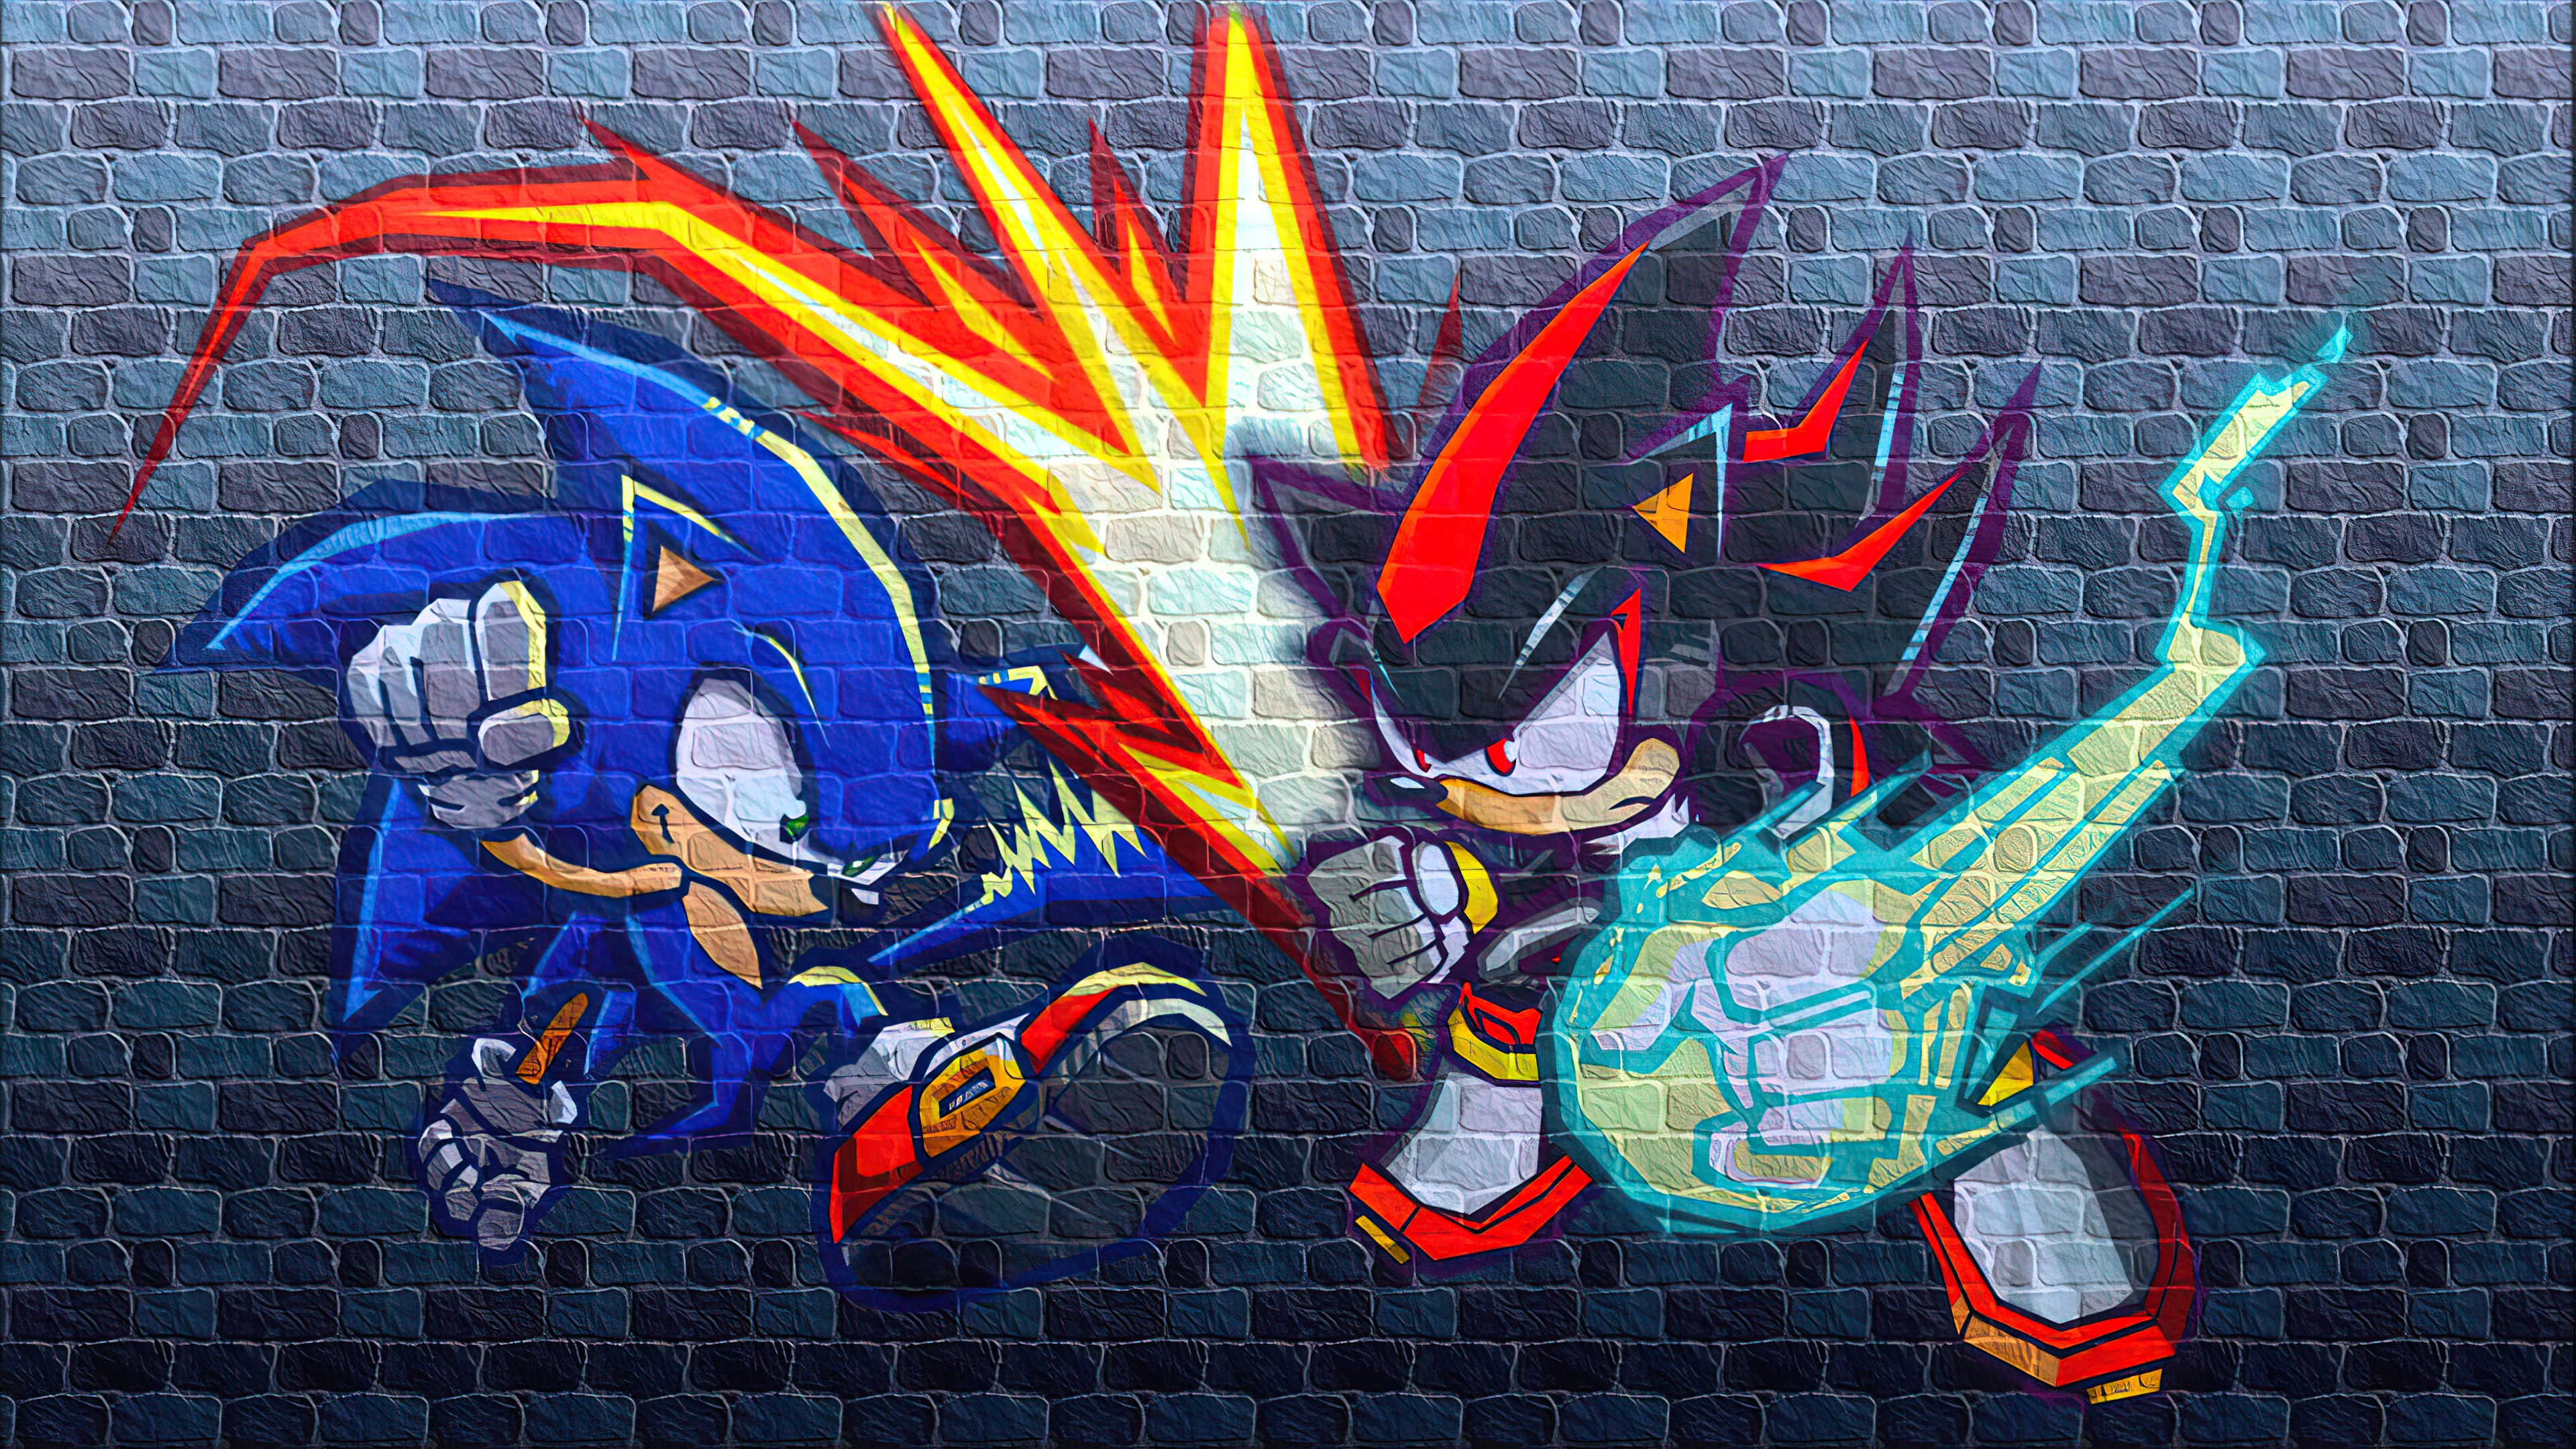 Sonic , Shadow and Silver >AndreaTheCat< - Illustrations ART street